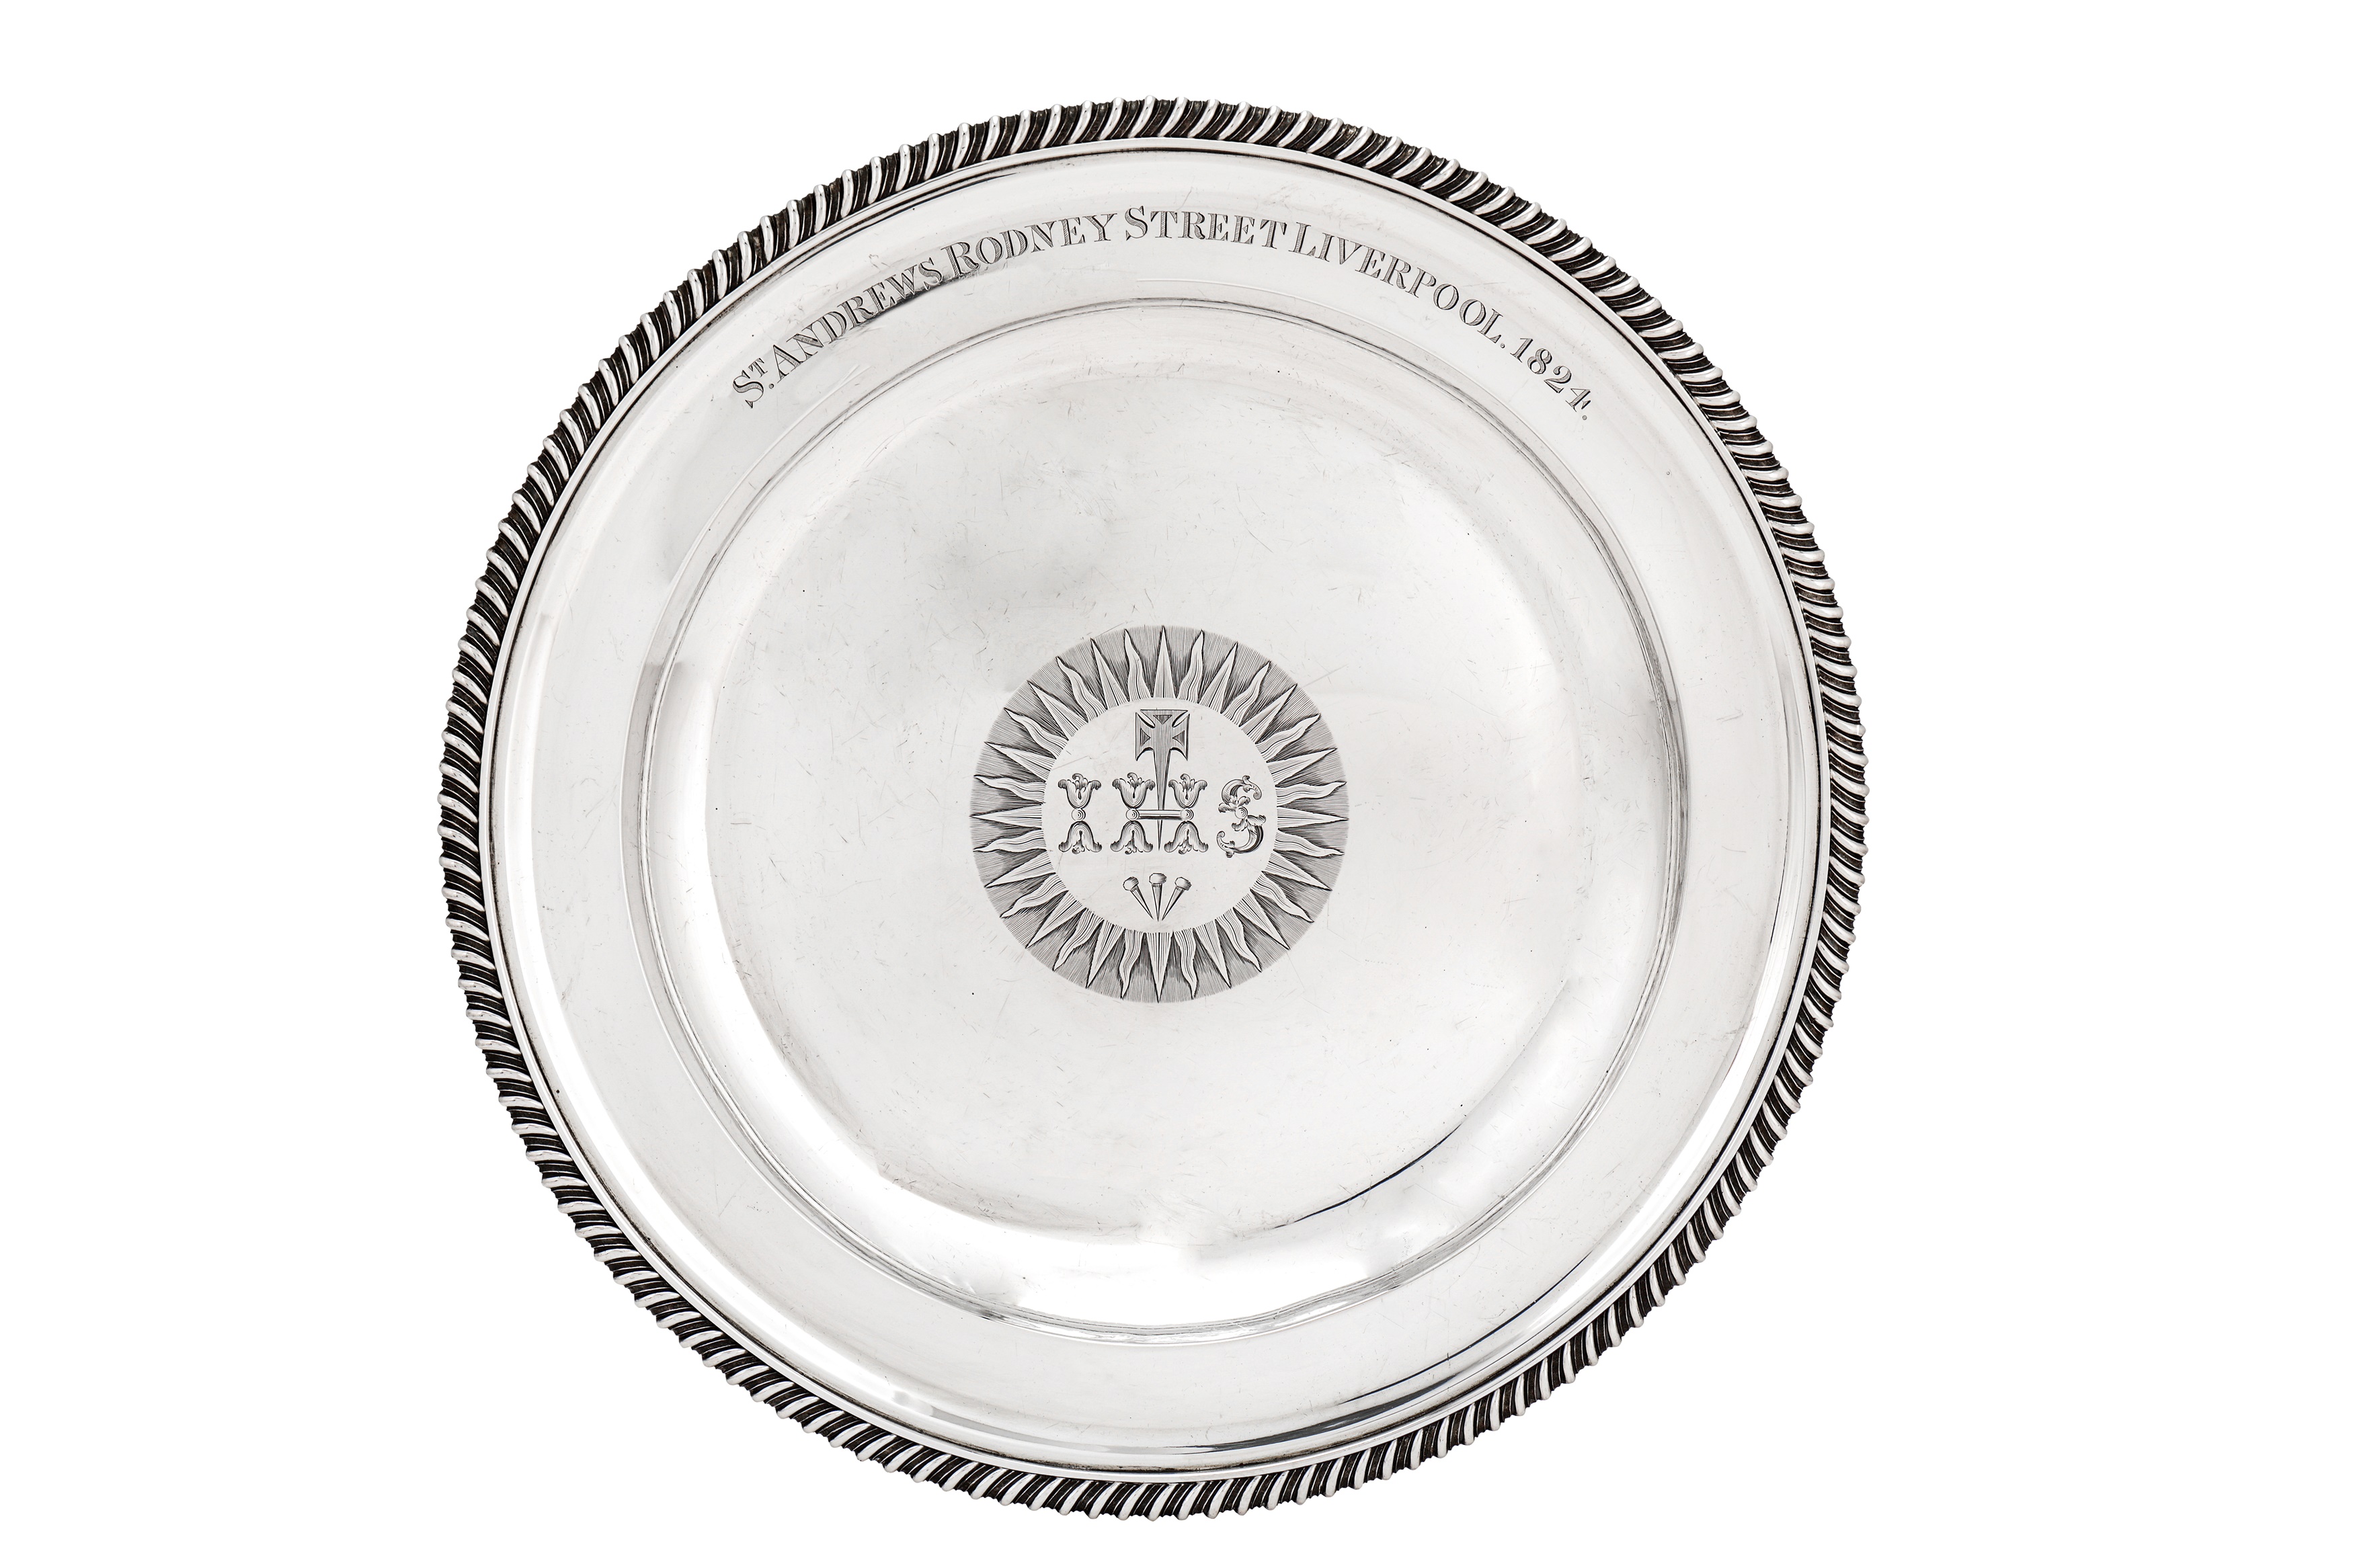 Ecclesiastical - A large George IV sterling silver alms basin, London 1823 by Rebecca Emes and